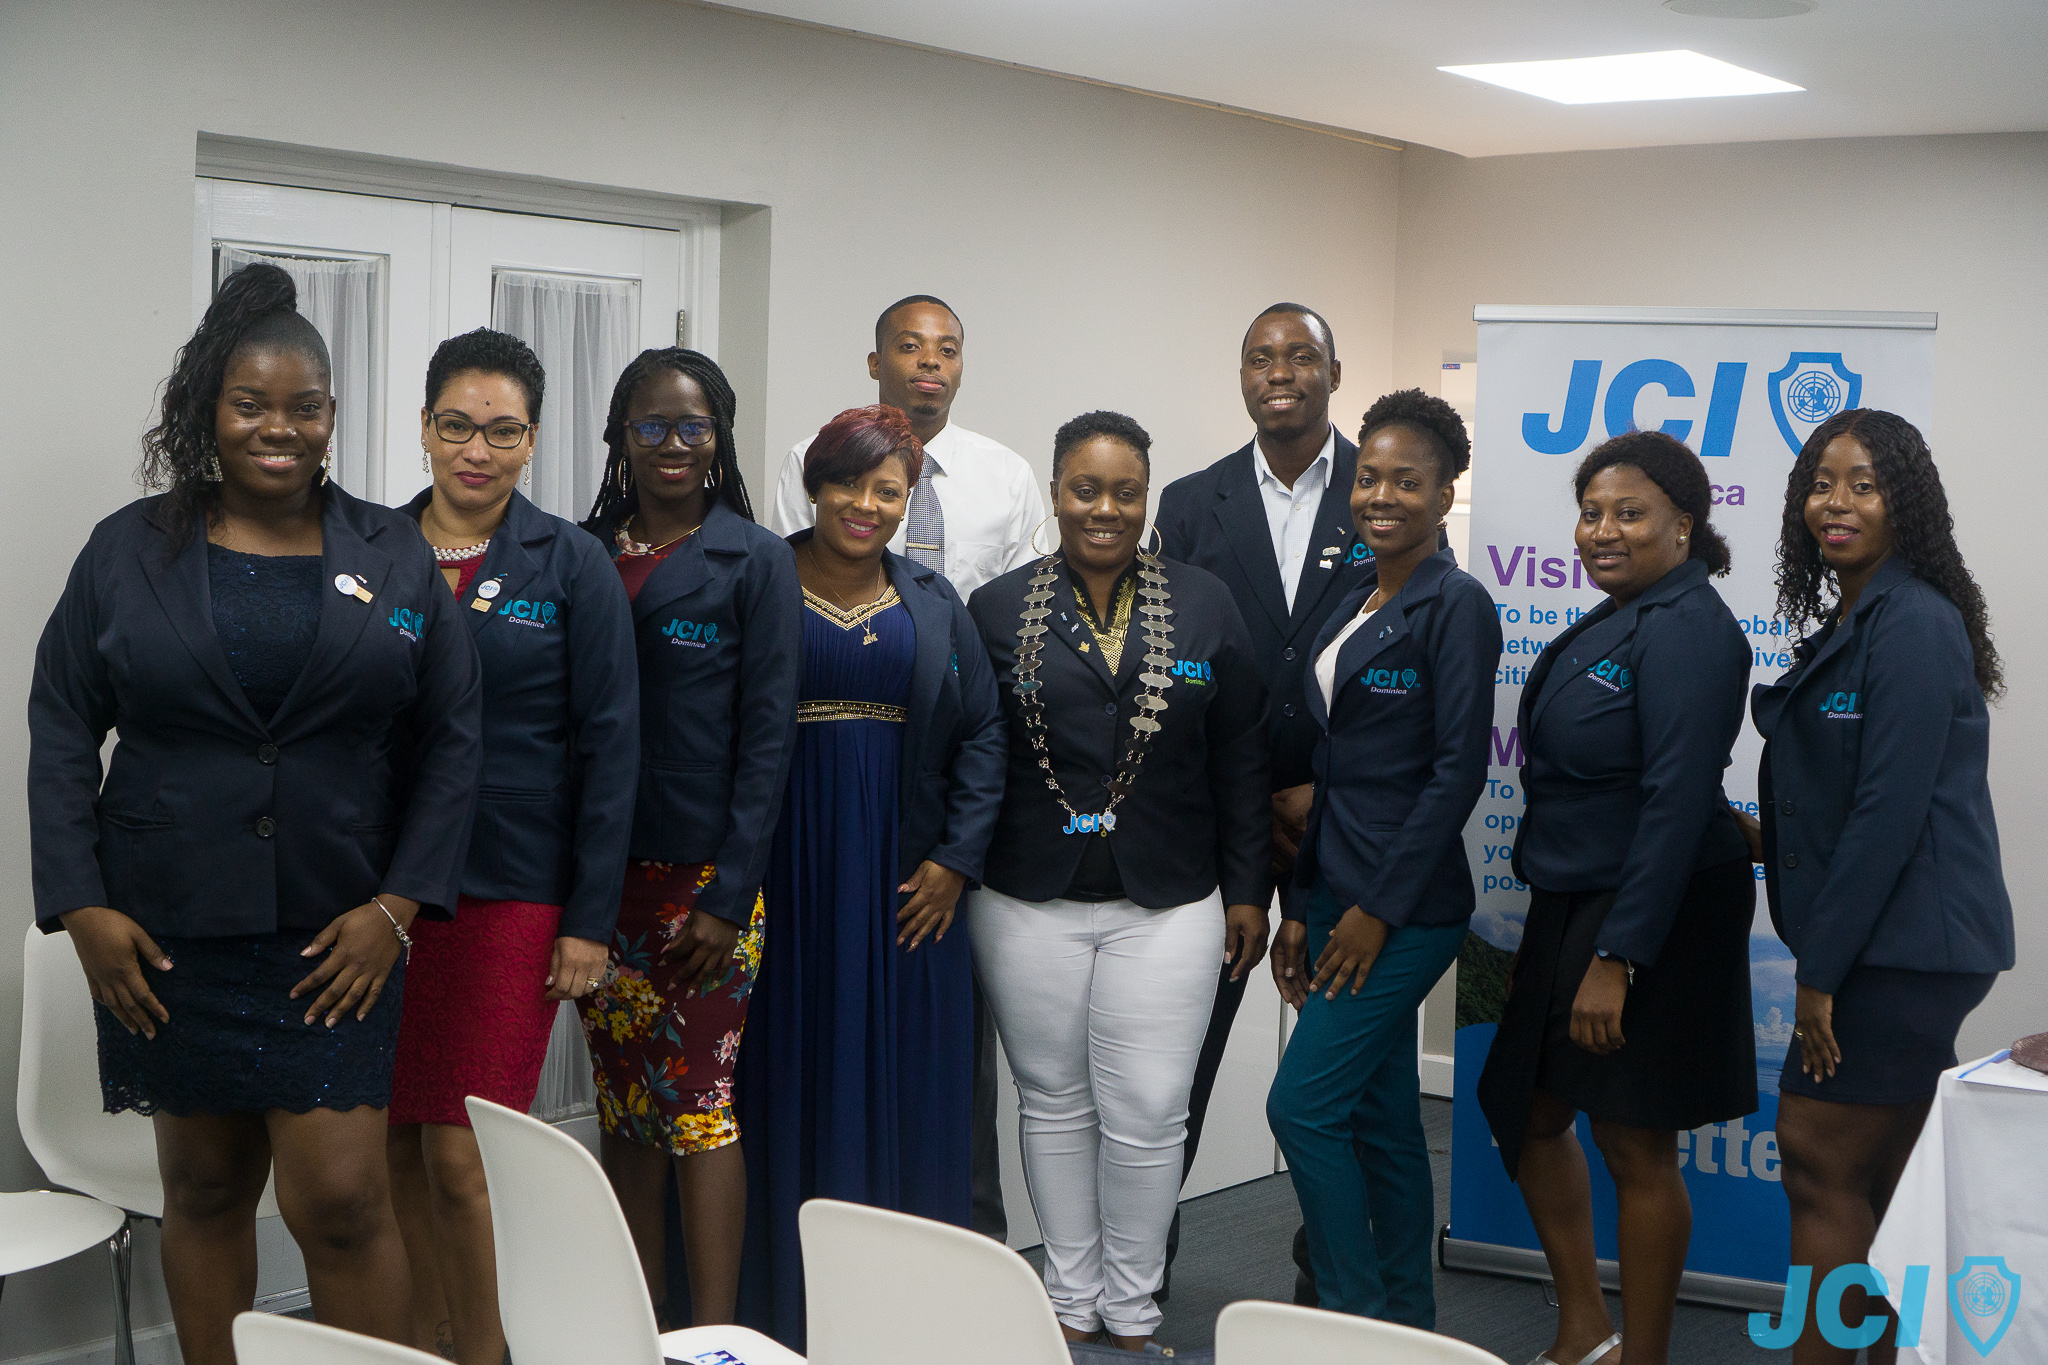 JCI Dominica hosts Annual Installation and Awards Cocktail Ceremony at Fort Young Hotel